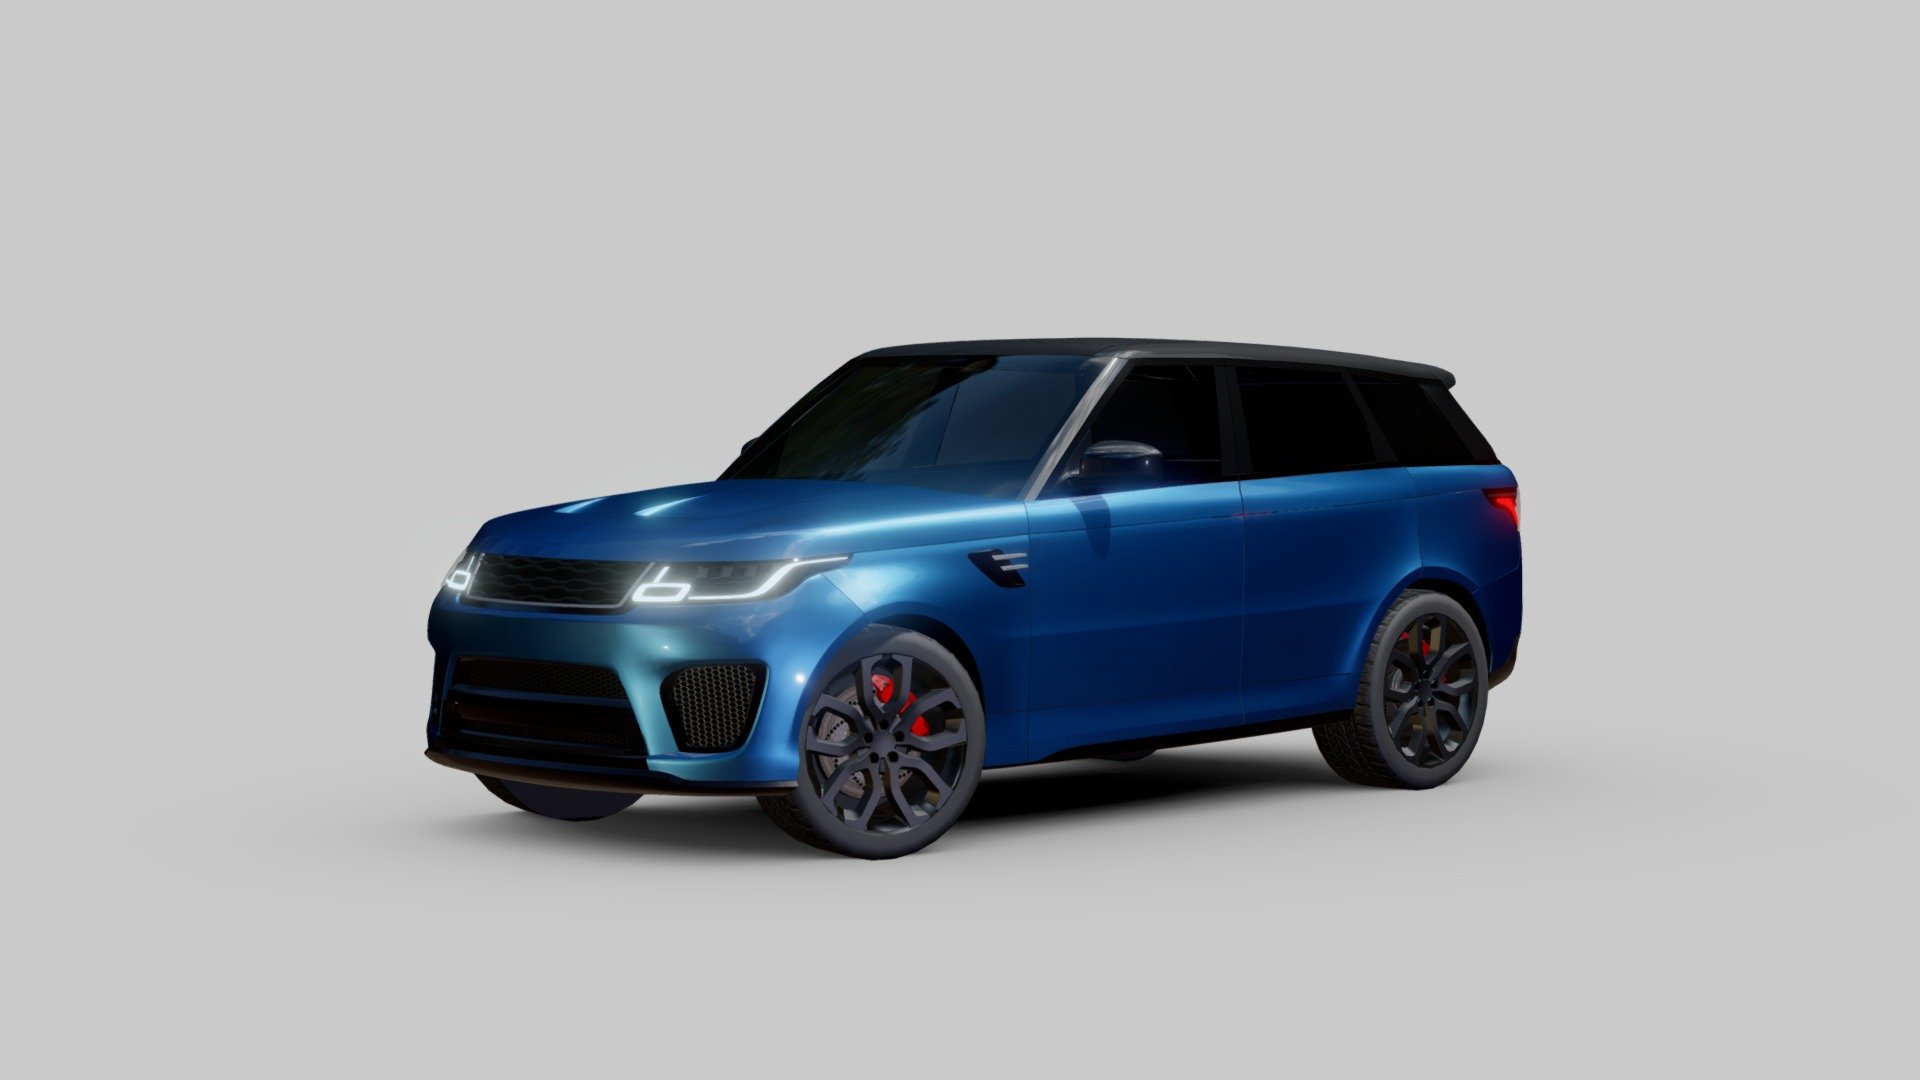 Introducing the 2018 Range Rover Sport SVR, a midpoly 3D model of the ultimate luxury SUV. This model captures the exquisite design and impressive performance of the real vehicle, with wheels and calipers pivoted at sensible centres for easy animation and customization. The model is optimized for use in realtime rendering, with flawless topology, efficient UV mapping and realistic PBR textures. Whether you need it for a game, a simulation or a visualization project, this model will elevate your scene with its style and sophistication. Don’t miss this opportunity and download it now!

Modeled in Blender using subdivision modeling. Subdiv 1 applied (higher levels can be requested after purchase)

Available on BMC, Cgtrader and Turbosquid (soon) - Range Rover Sport - $20 - 3D model by iSteven (@OneSteven) 3d model